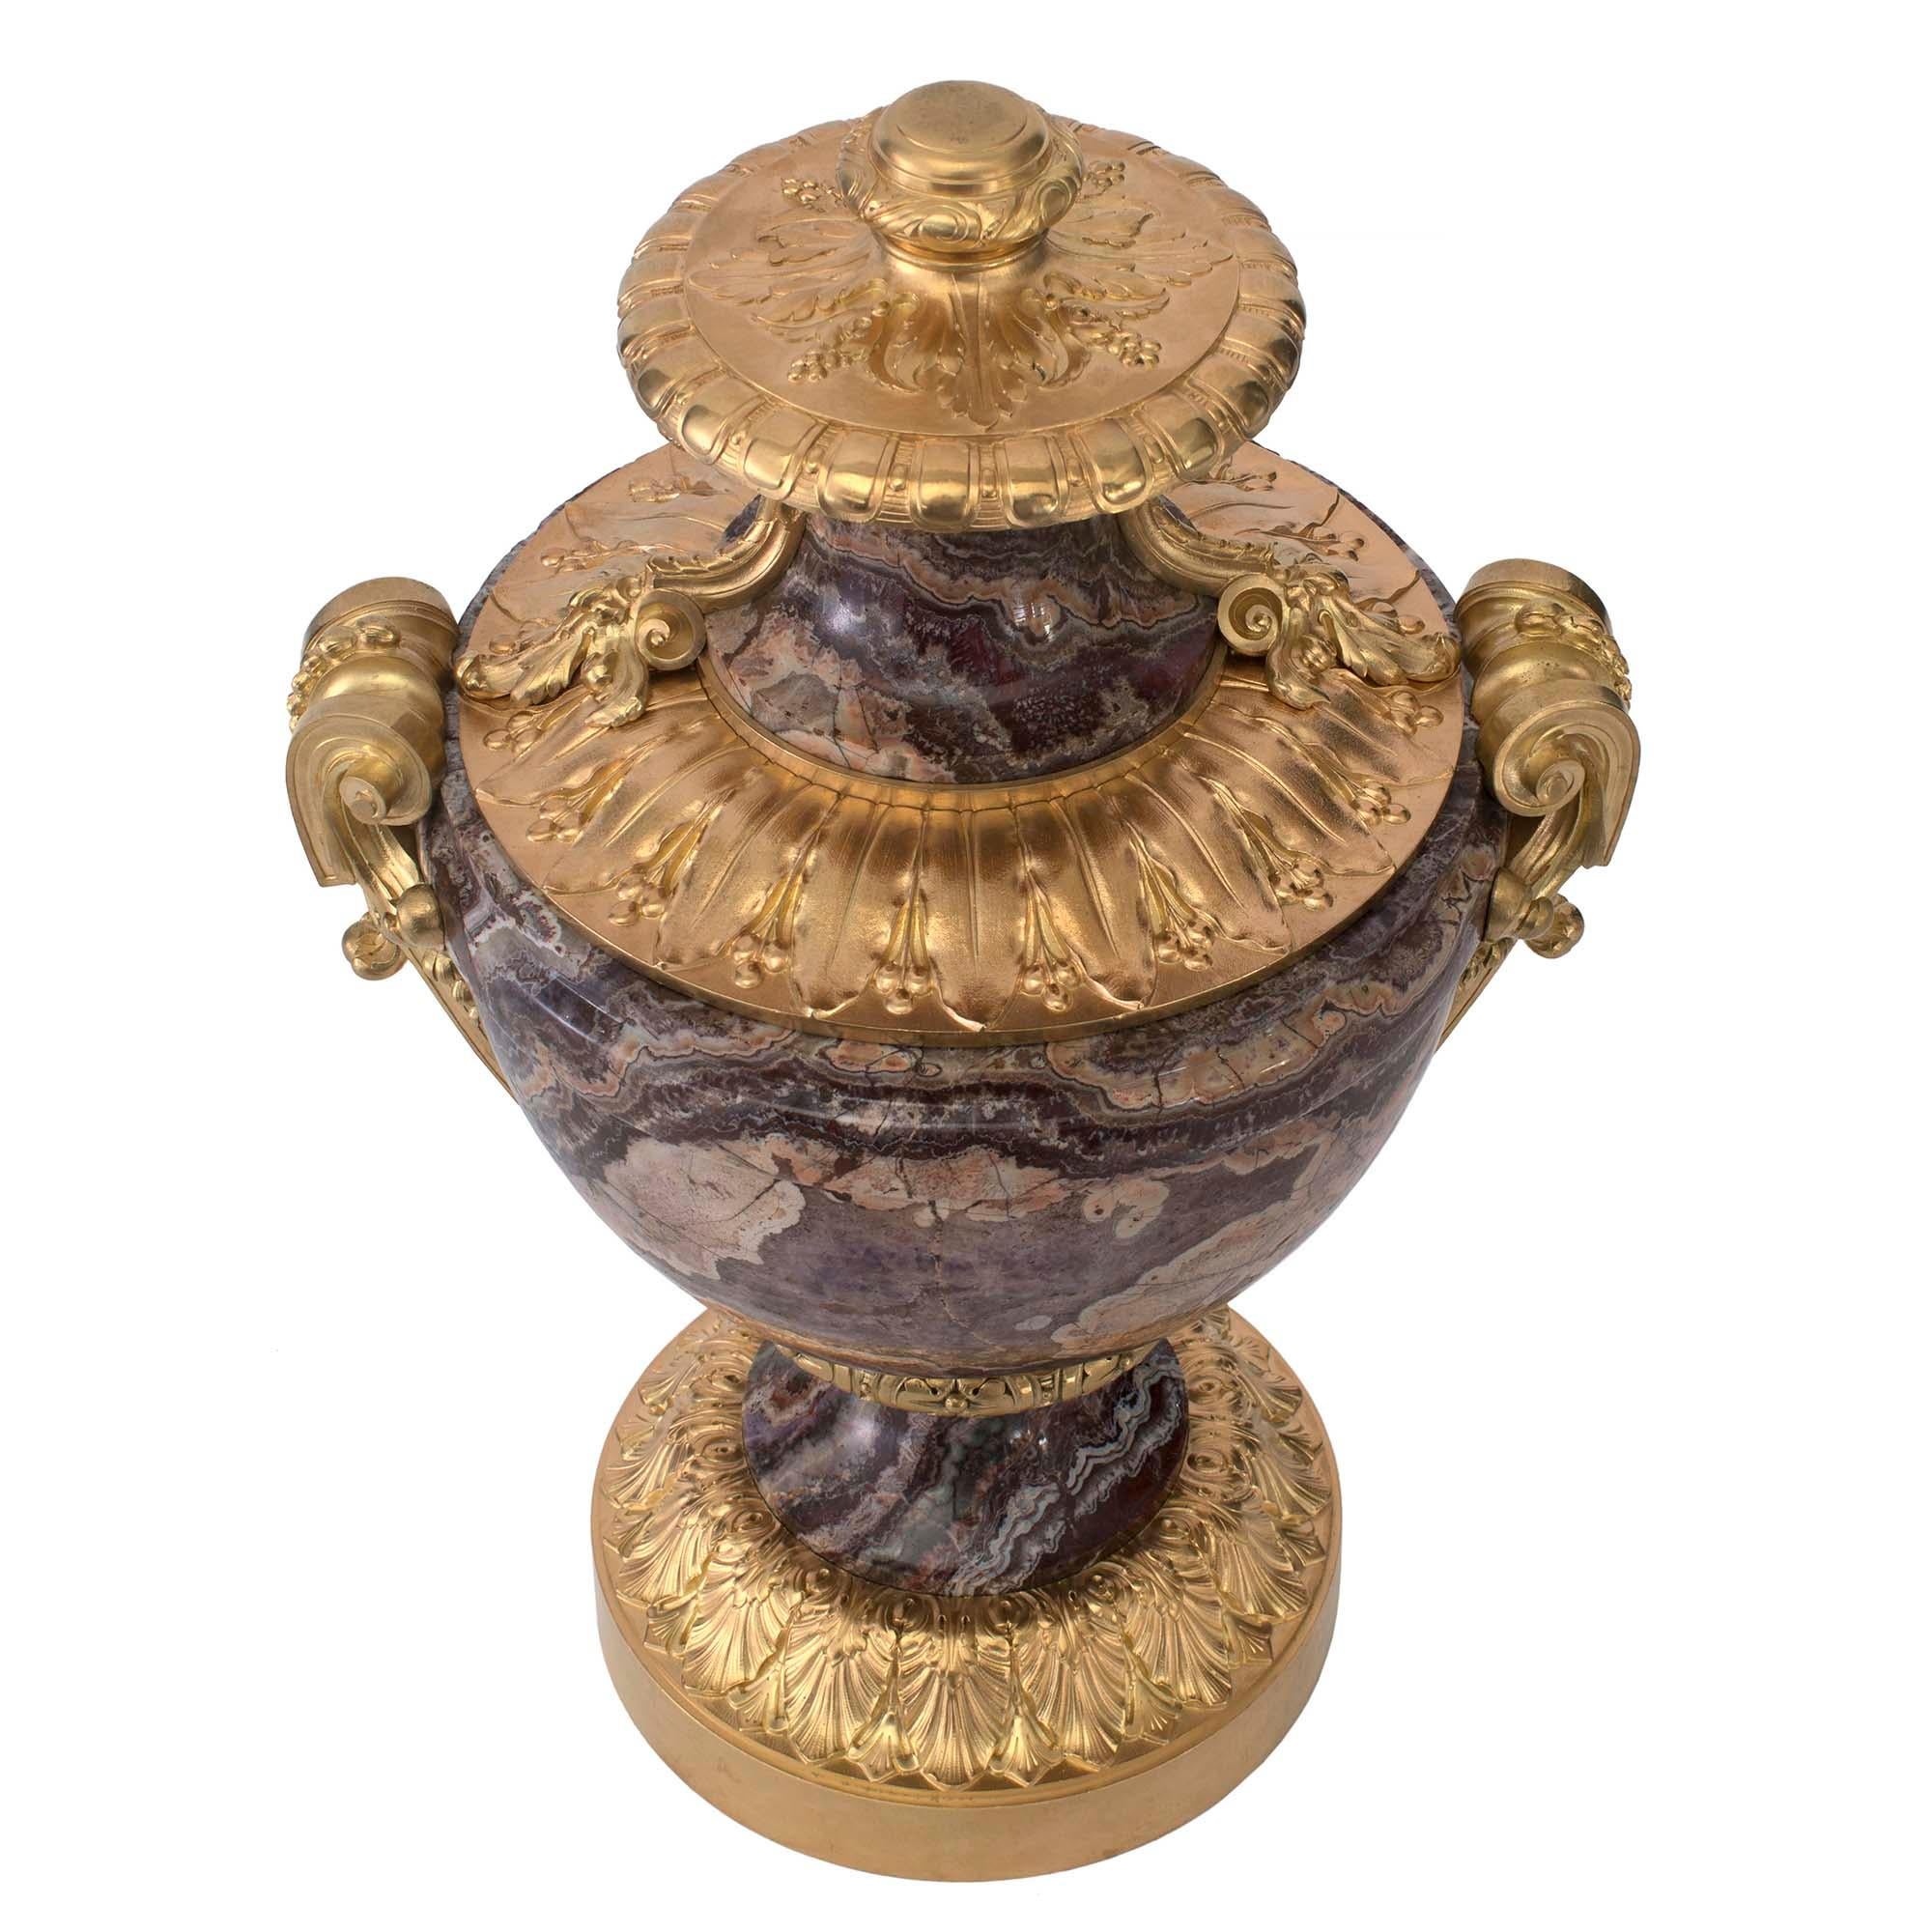 A stunning and impressive French 19th century Louis XVI st. marble and ormolu lidded urn. The urn is raised on a circular base decorated with acanthus leaves and an ormolu band above the marble socle. Flanking the marble body are scrolled handles